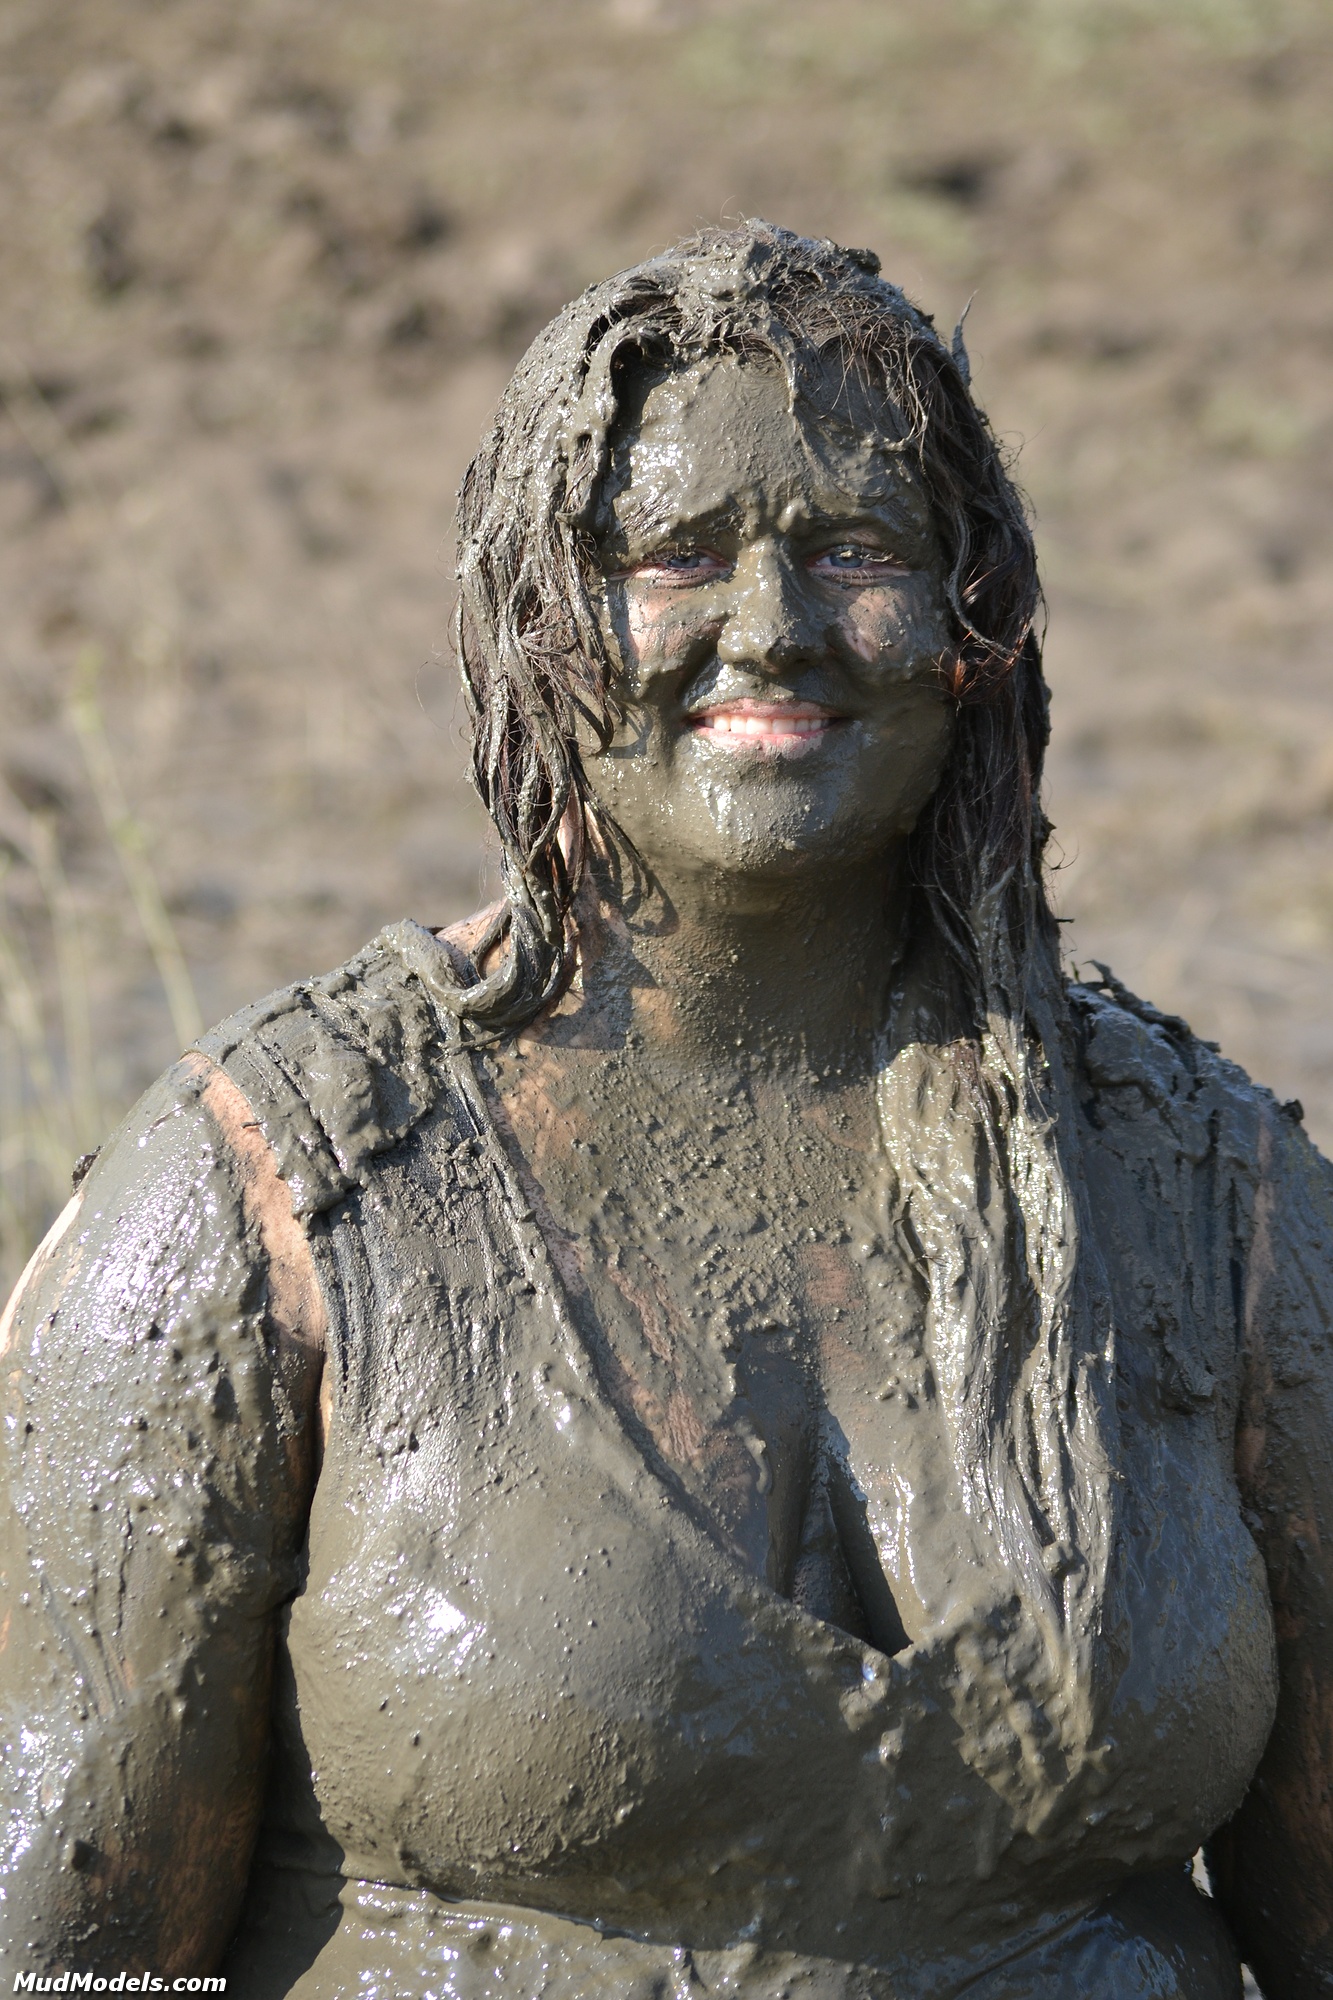 Deveny diving face first in the wet mud, her sheer dress soon is covered in...